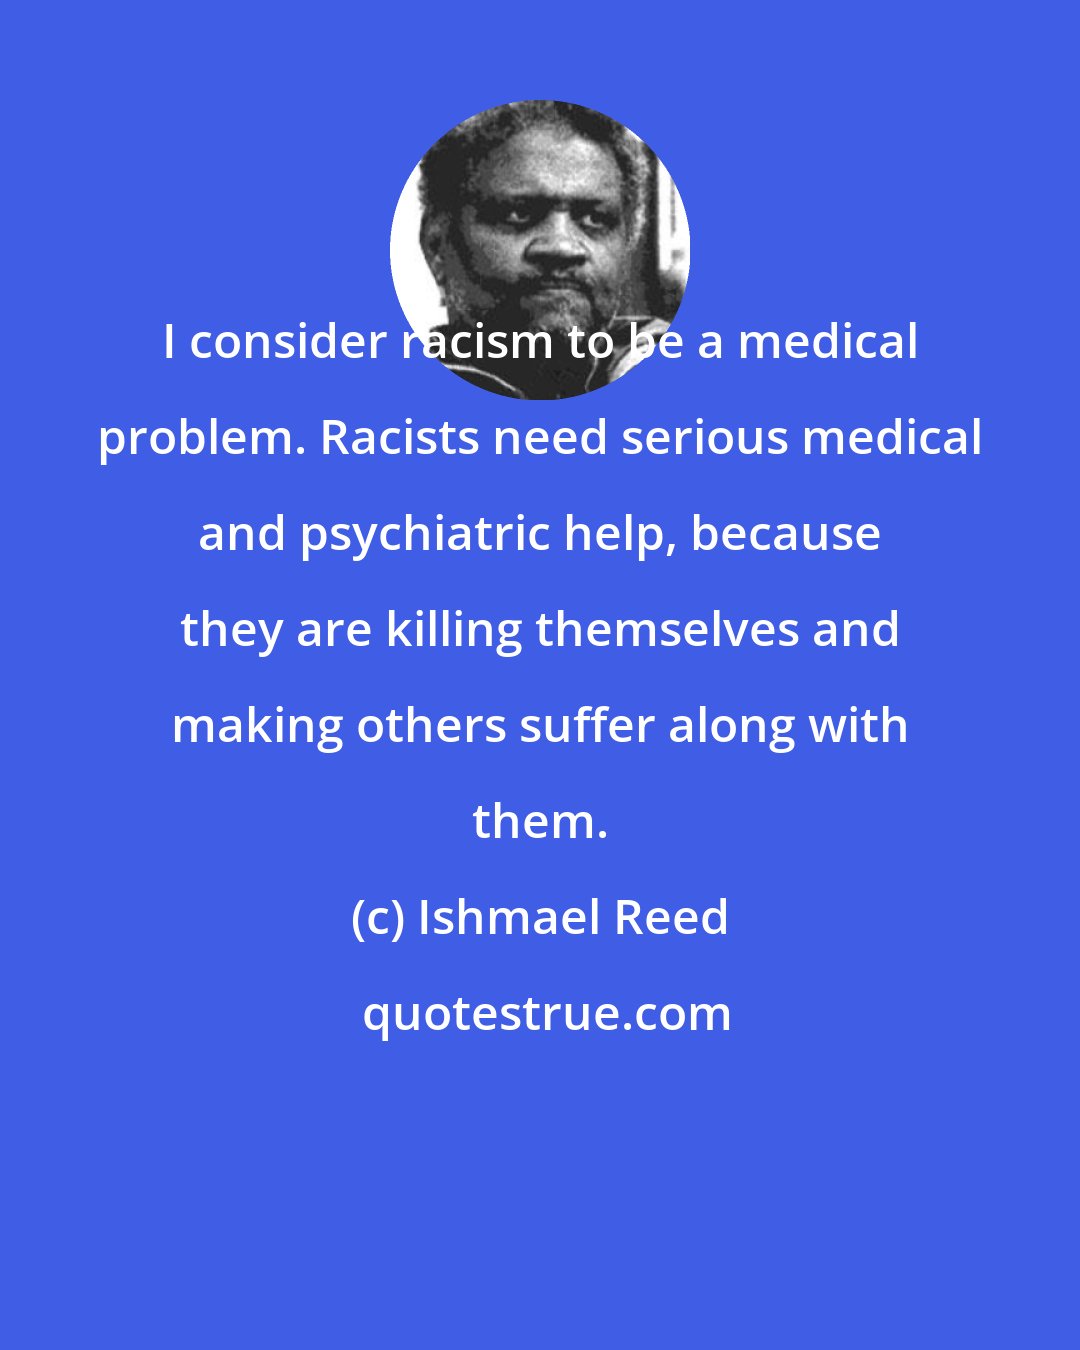 Ishmael Reed: I consider racism to be a medical problem. Racists need serious medical and psychiatric help, because they are killing themselves and making others suffer along with them.